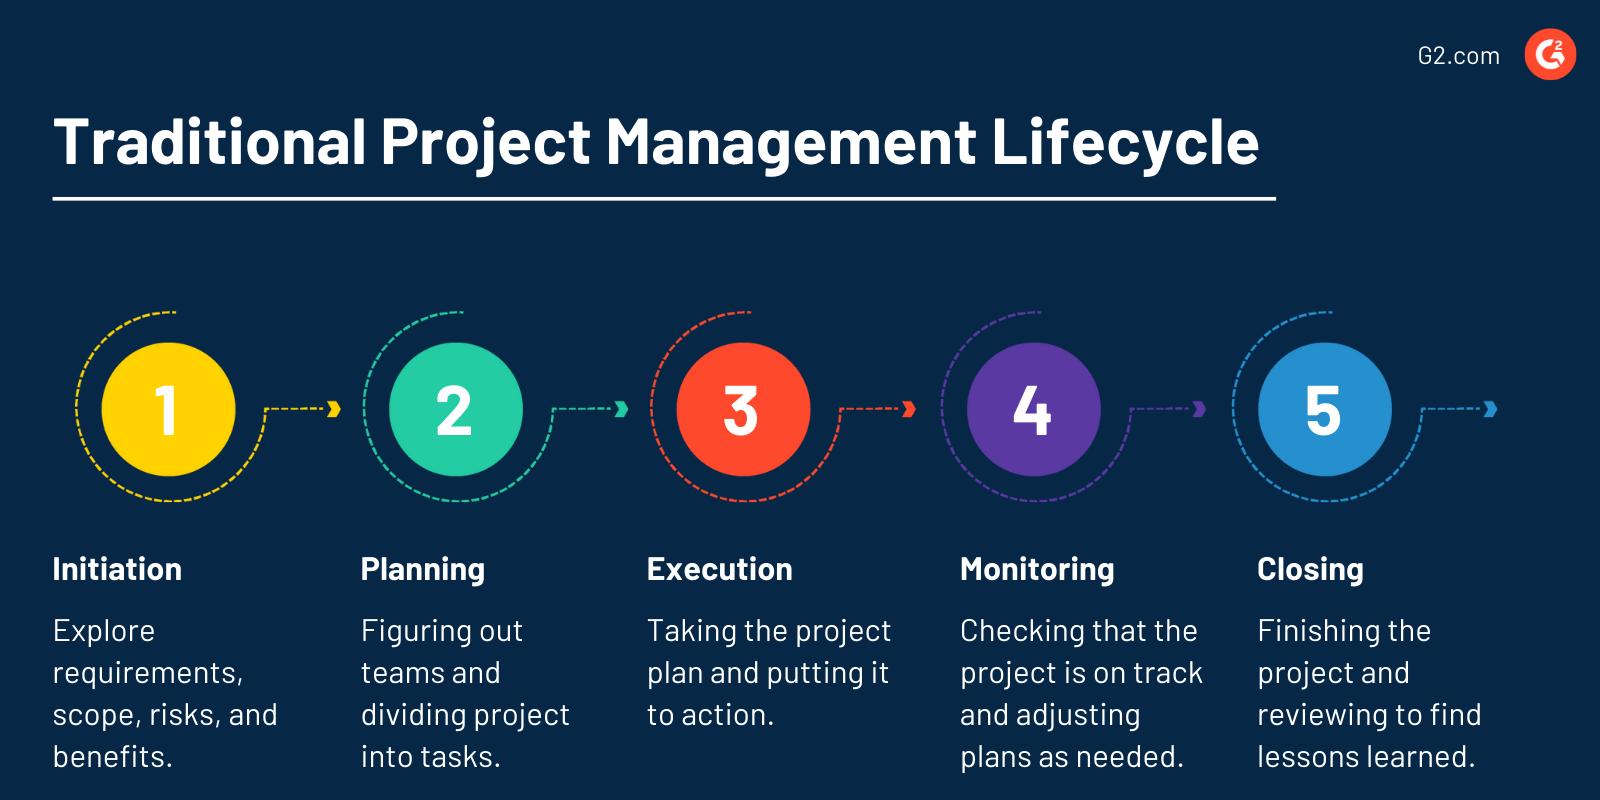 Traditional Project Management: Why You Should Use a Classic